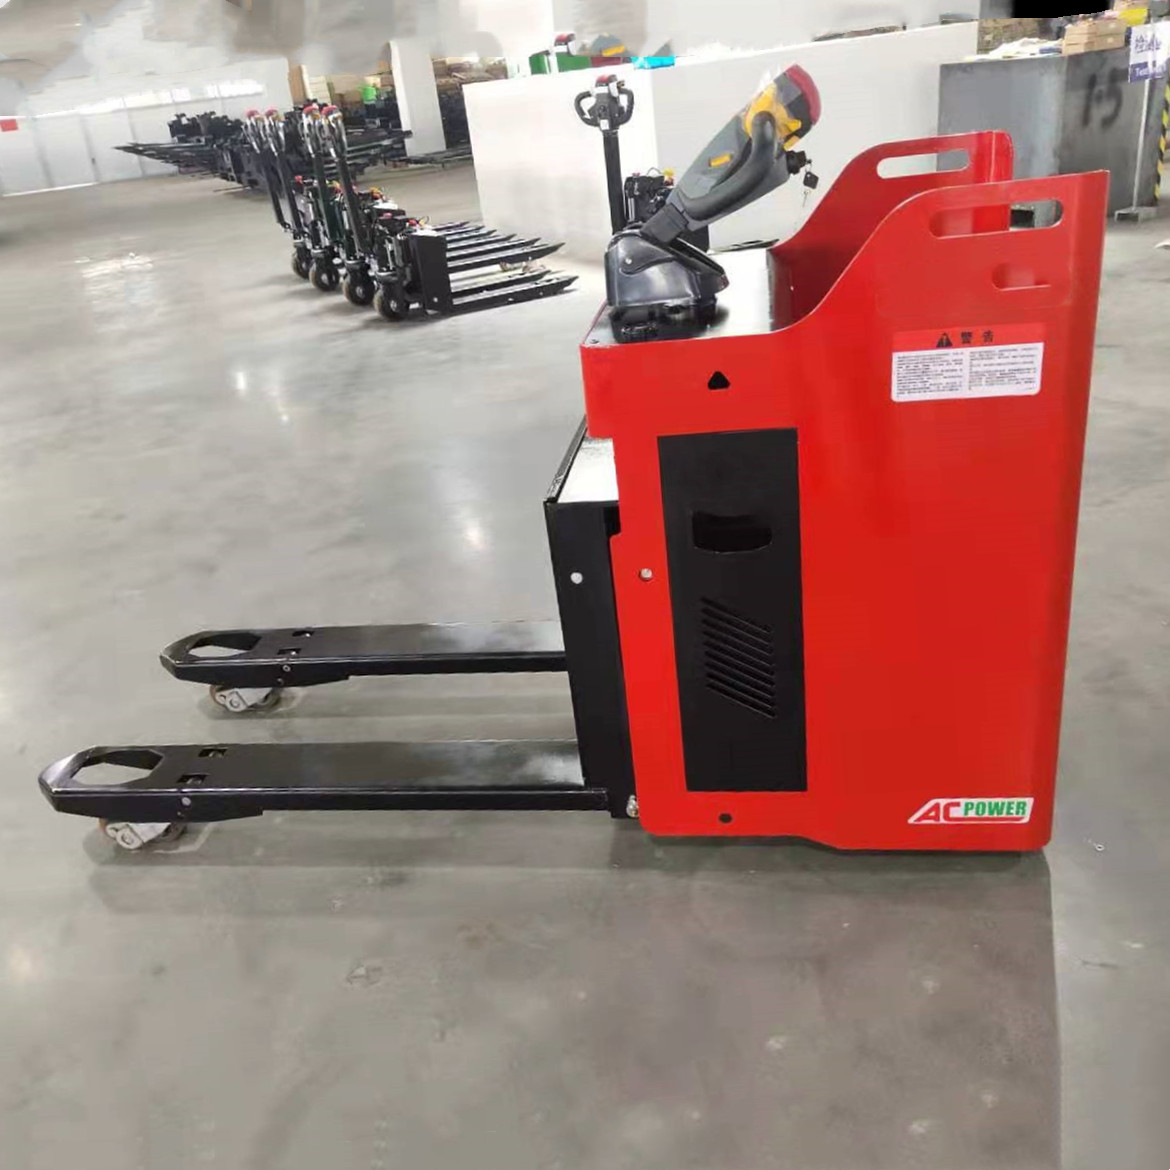 Stand on Rider Type 2500kg electric pallet truck - WELIFTRICH